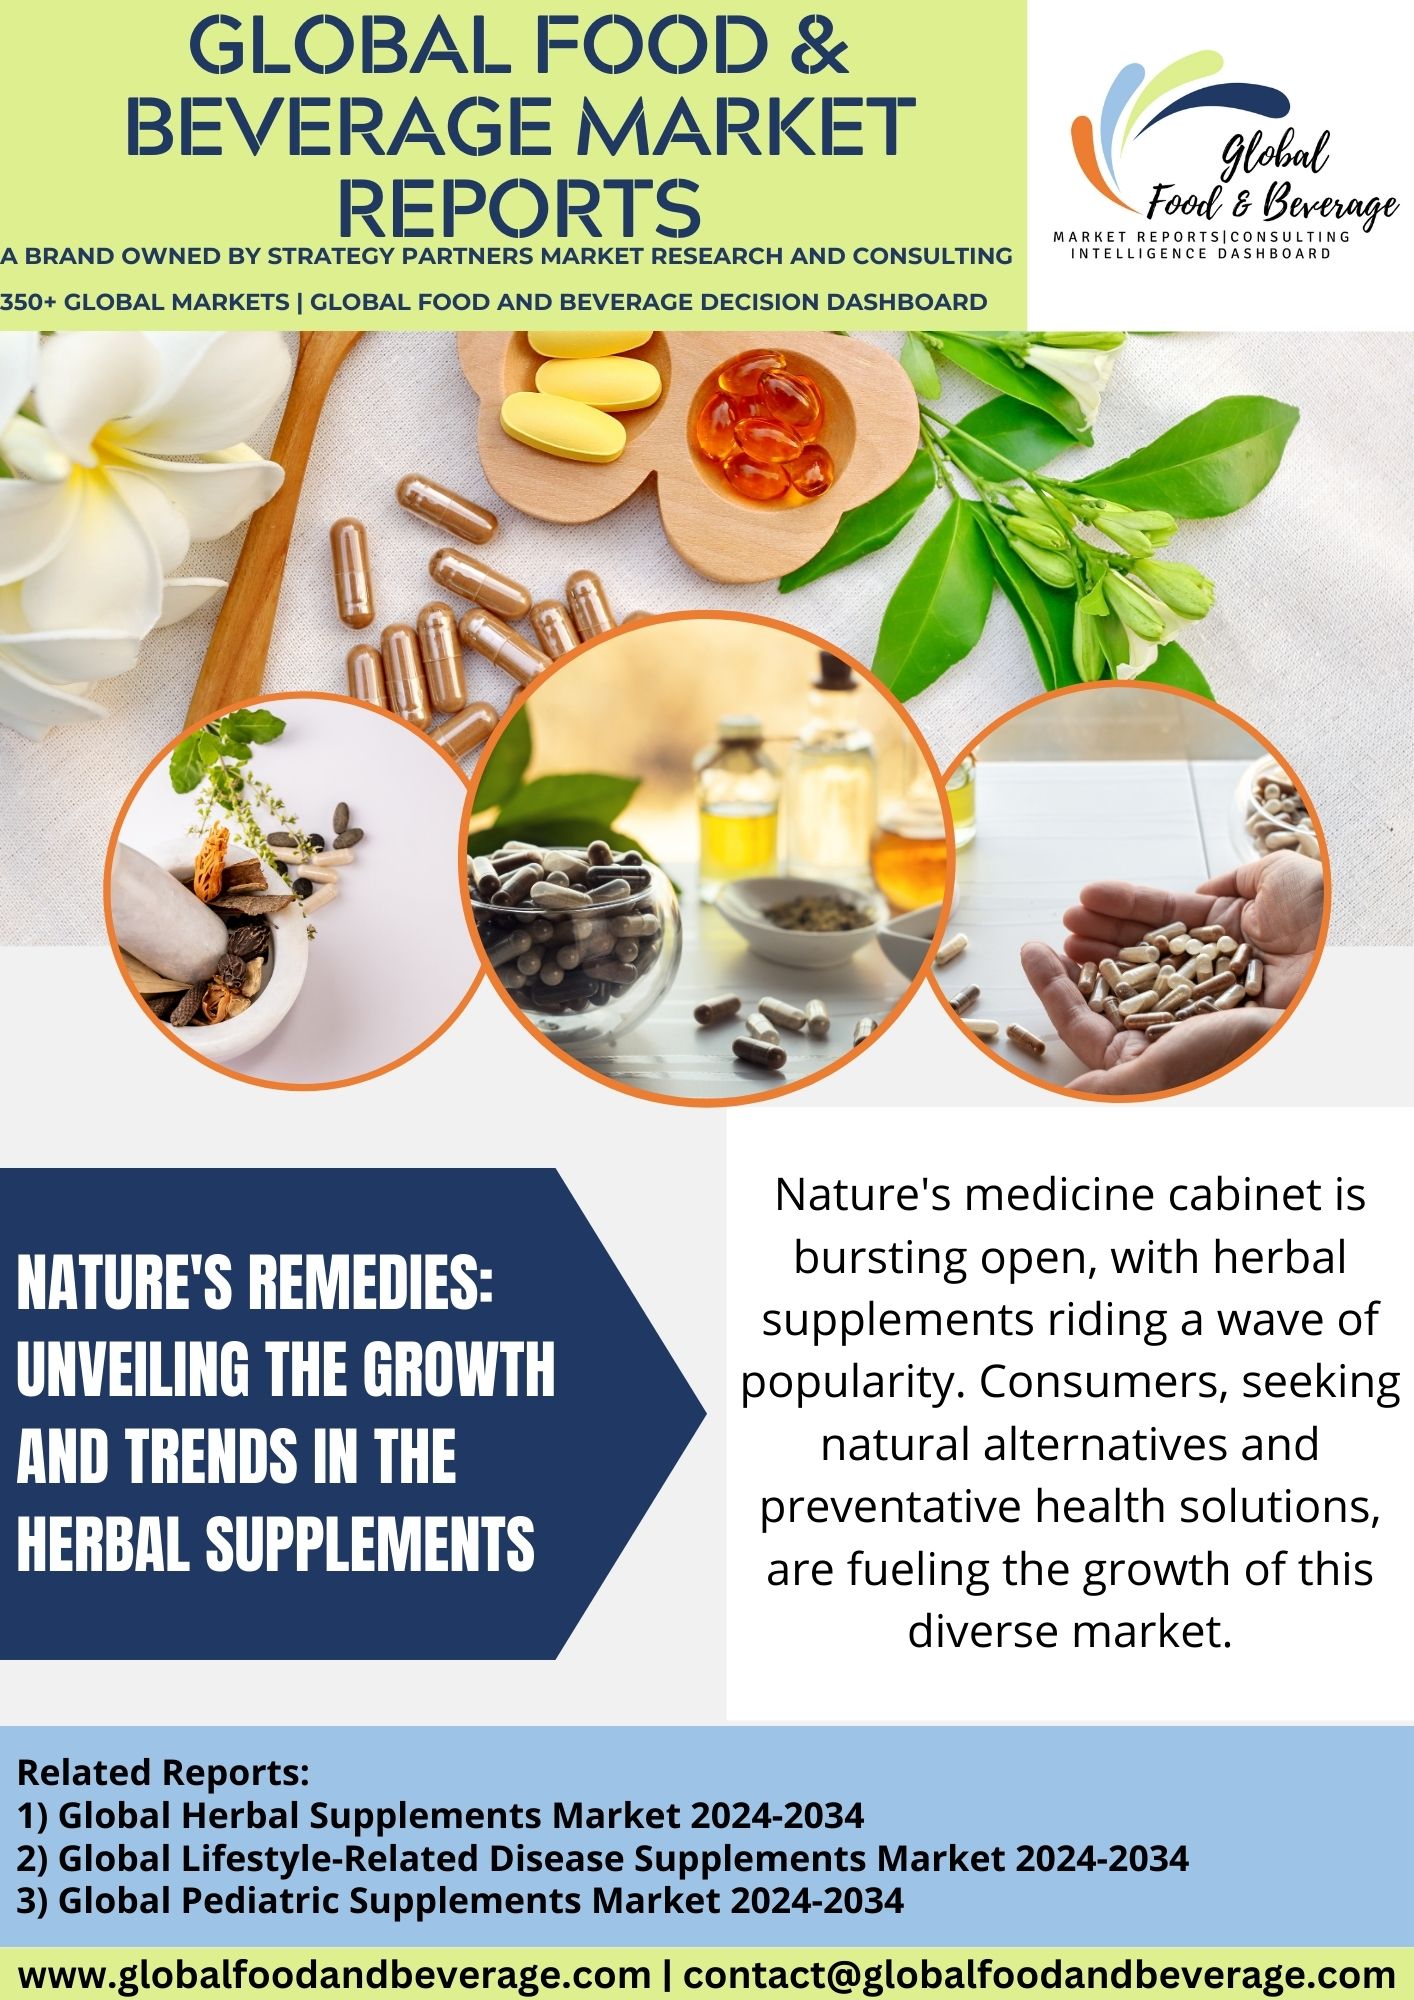 Unveiling the Growth and Trends in the Herbal Supplements Market